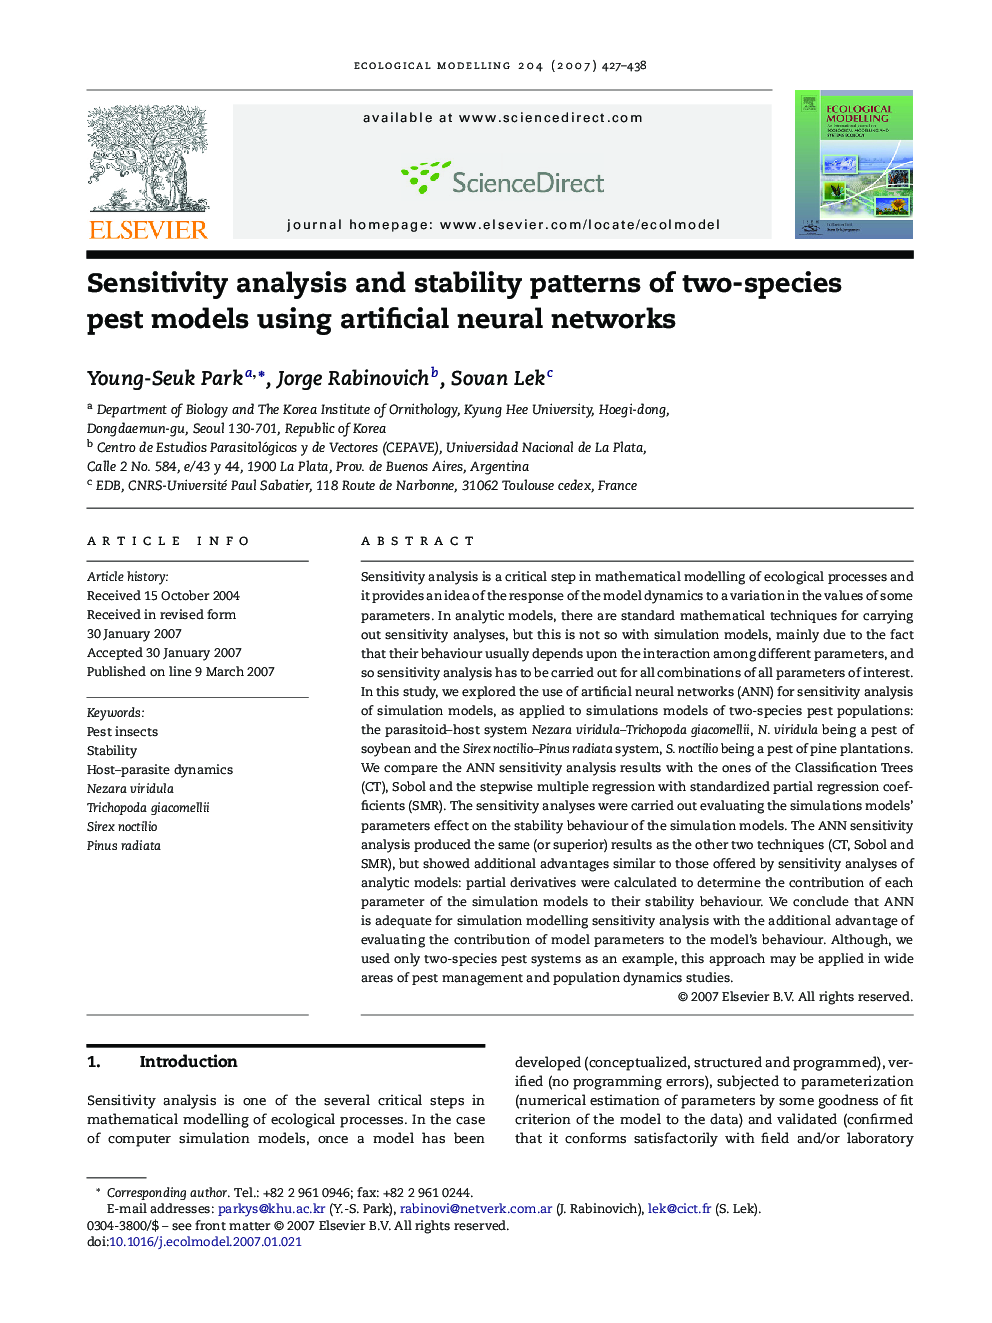 Sensitivity analysis and stability patterns of two-species pest models using artificial neural networks